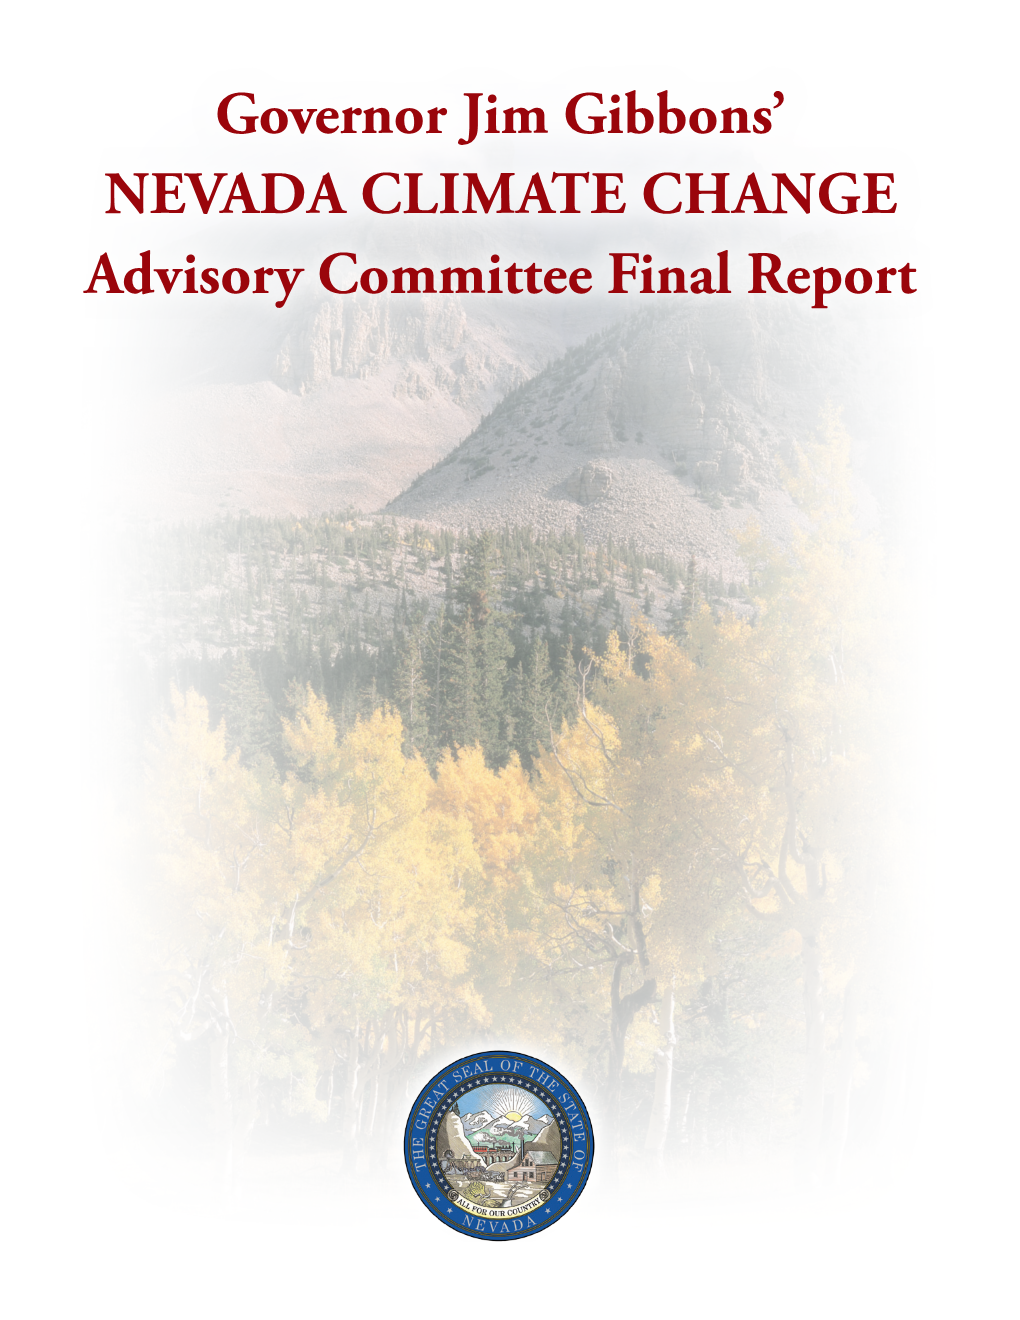 Nevada Climate Change Advisory Committee Final Report